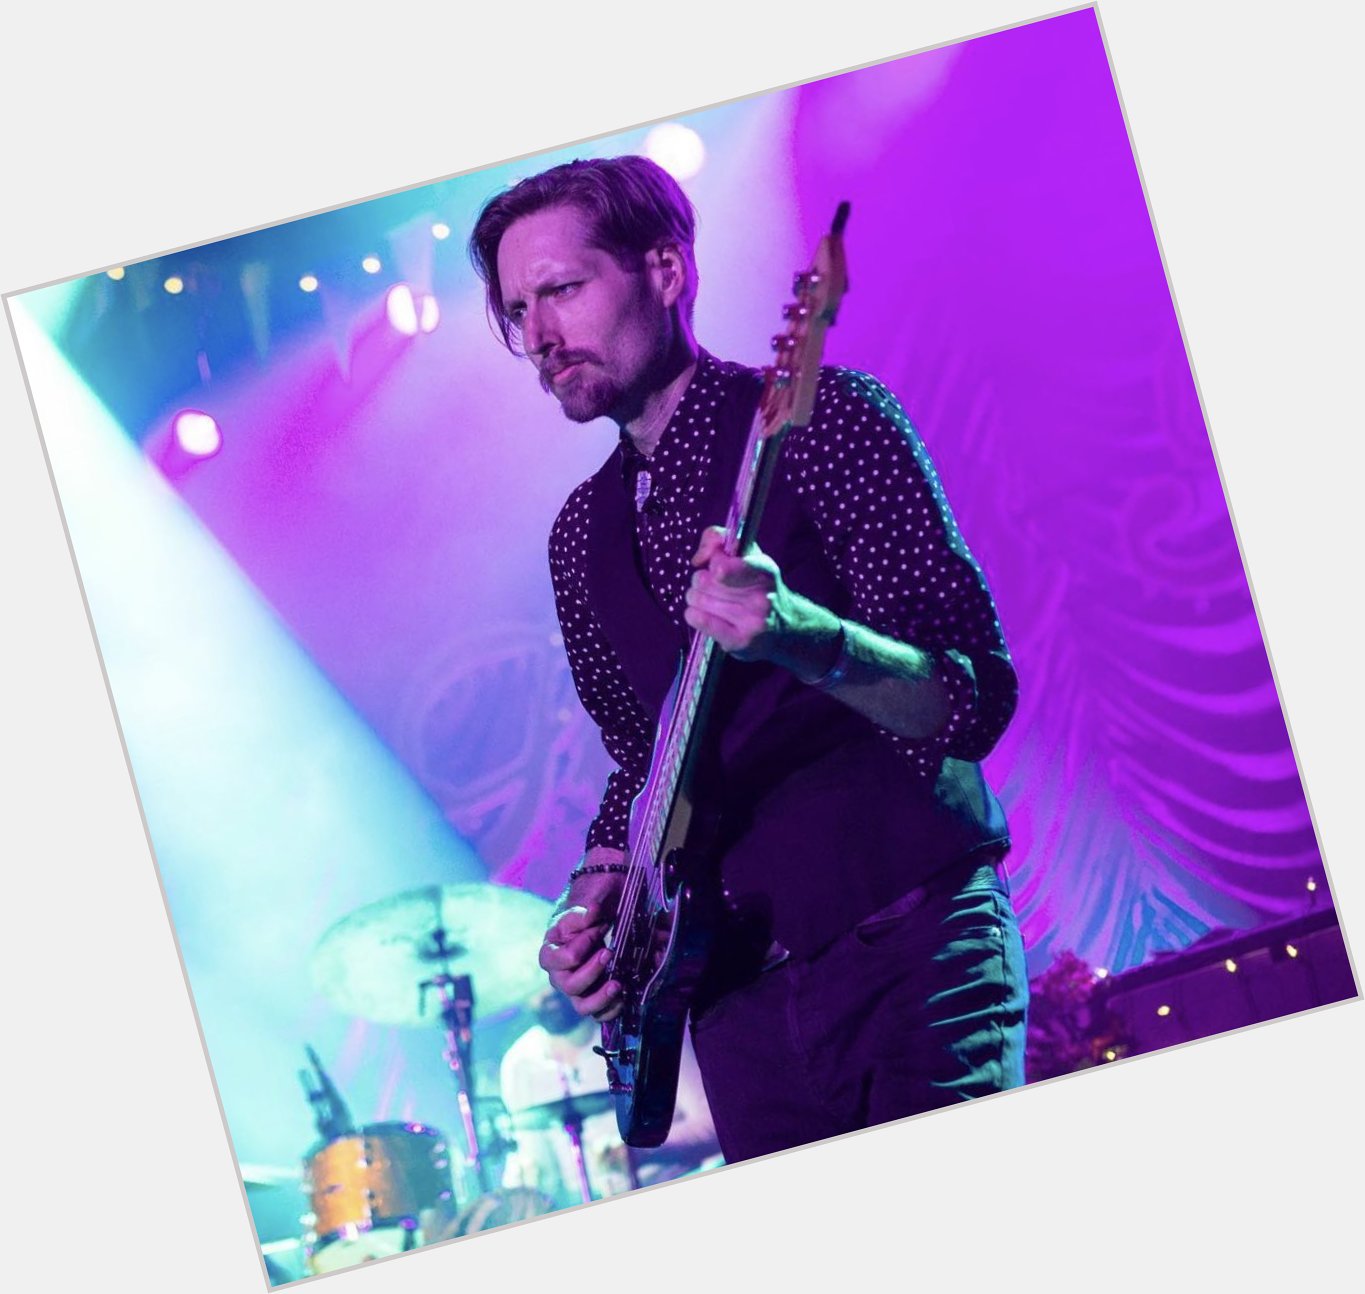      Mark Stoermer      One and only bassist for The Killers.

Happy birthday    